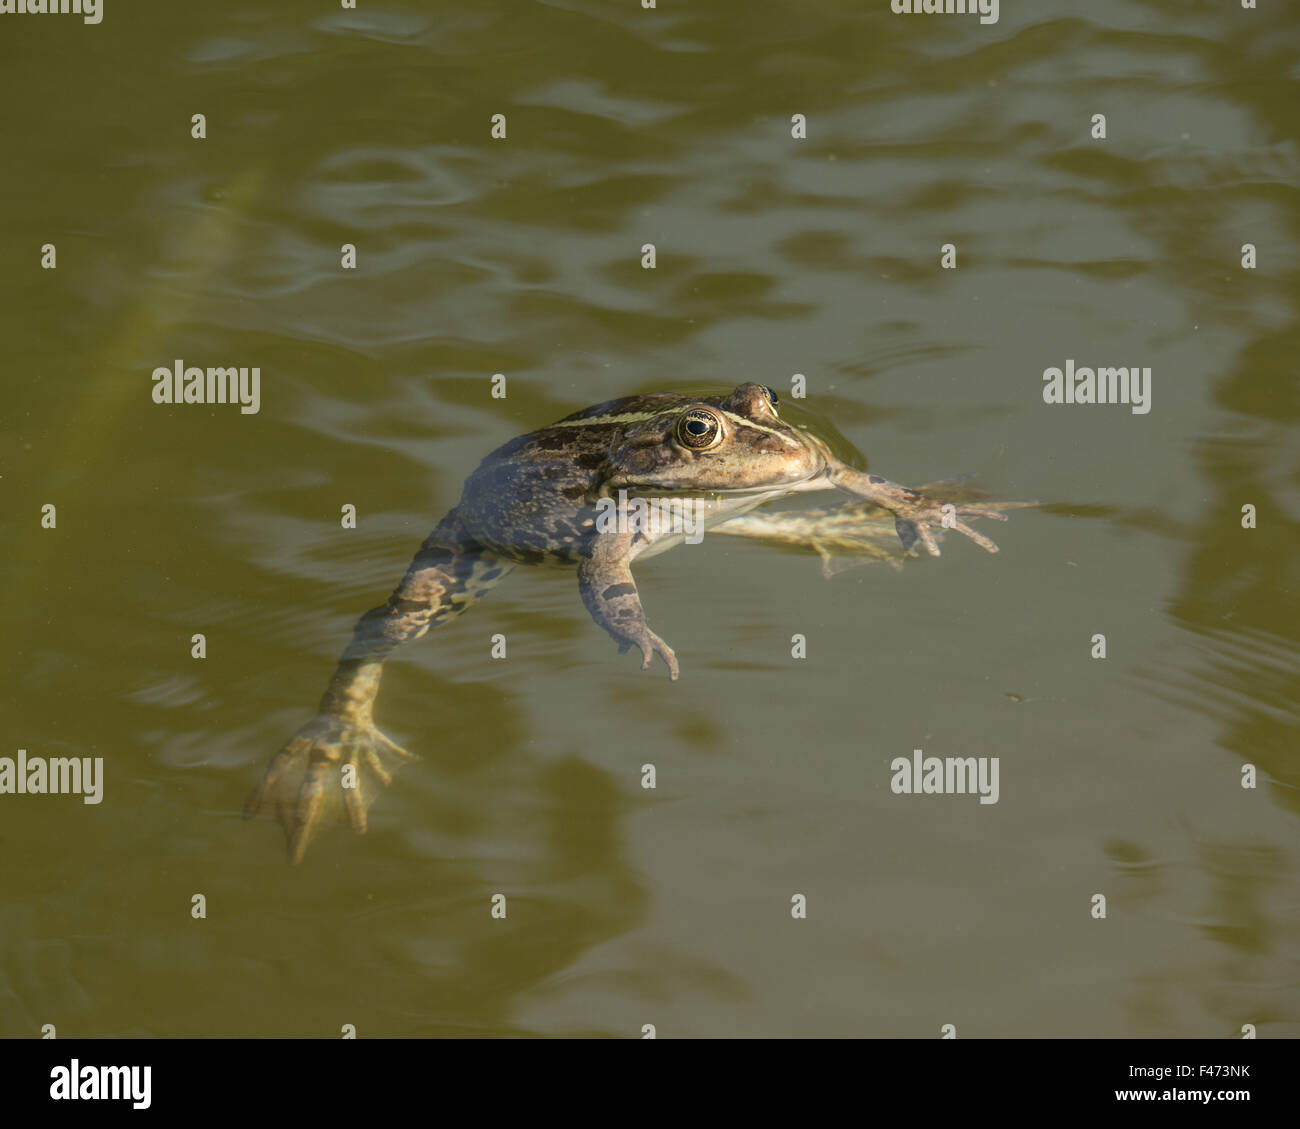 Edible frog, also common water frog or green frog (Rana esculenta) swimming, North Rhine-Westphalia, Germany Stock Photo